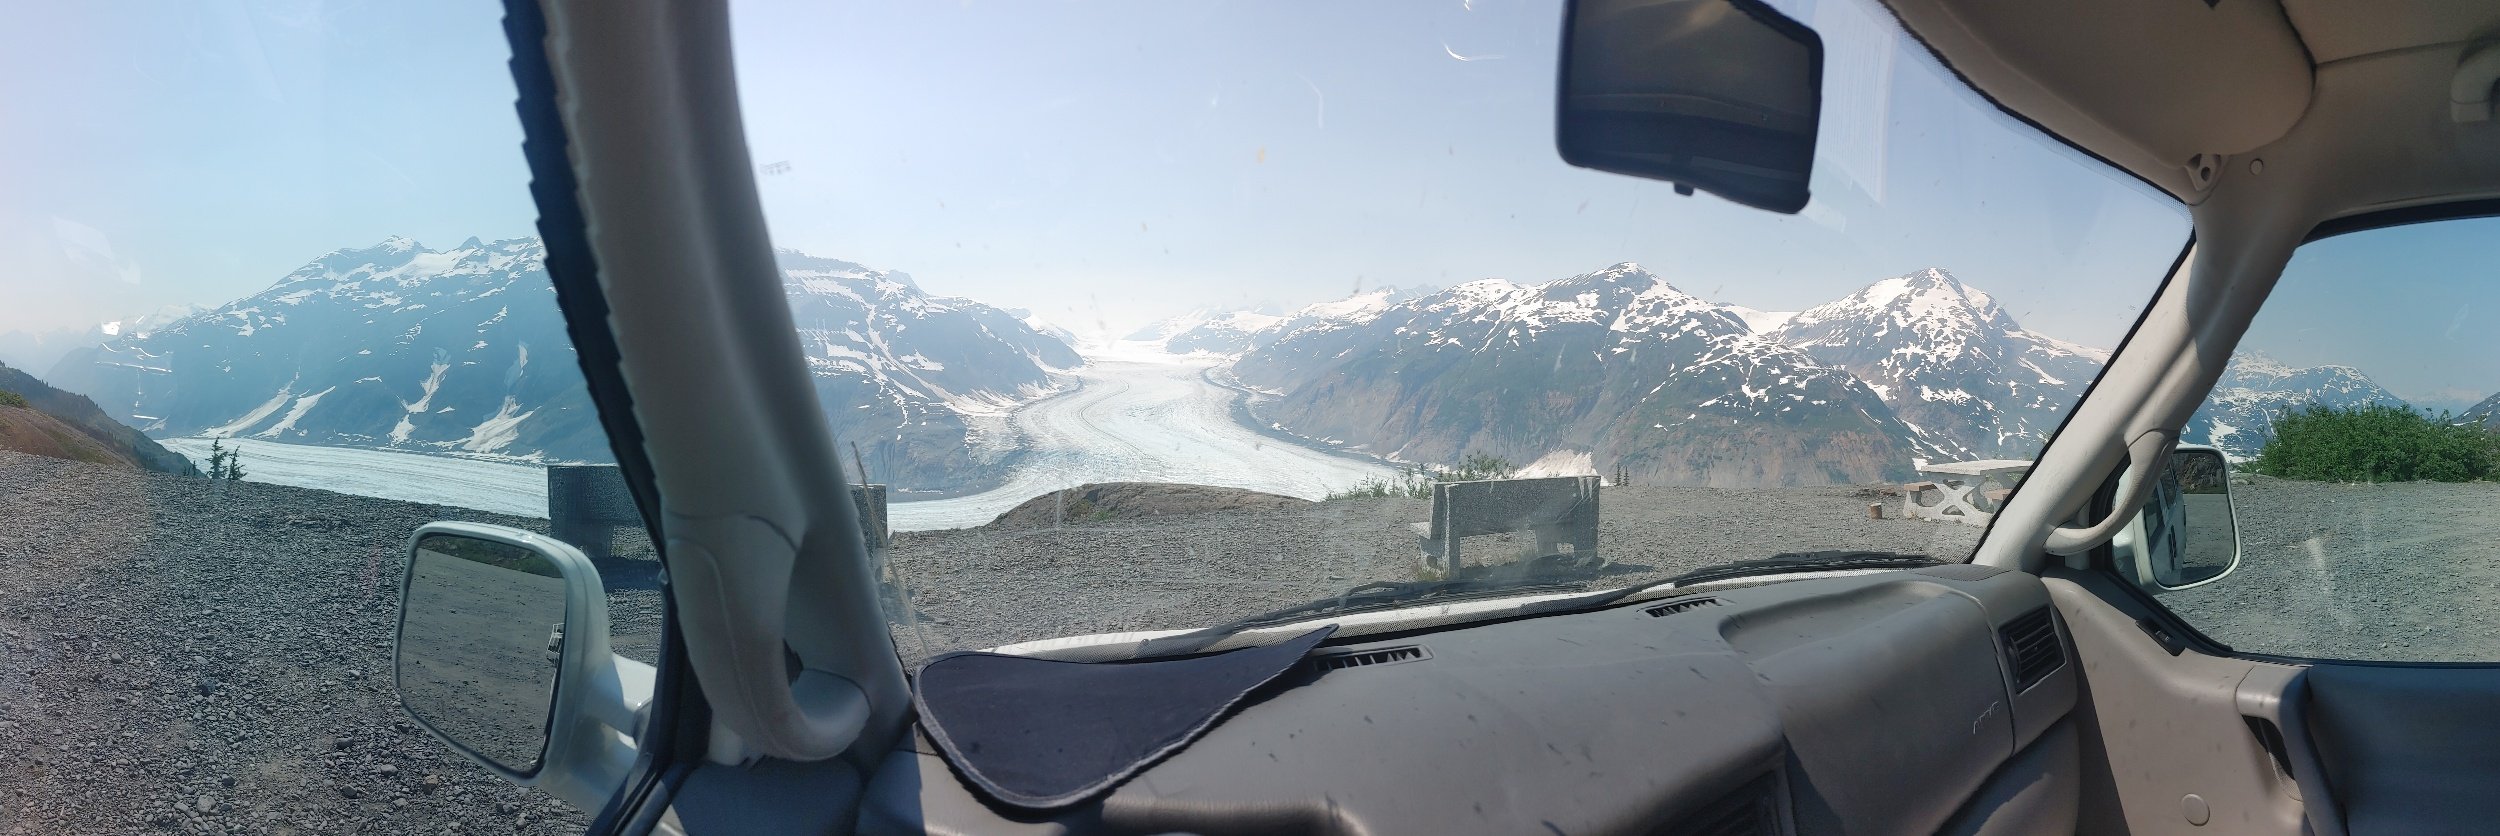   I recorded my reaction of coming up on to Salmon glacier and maybe will figure out how to post the audio file here. But for now you will have to settle for “STUPENDOUS” 